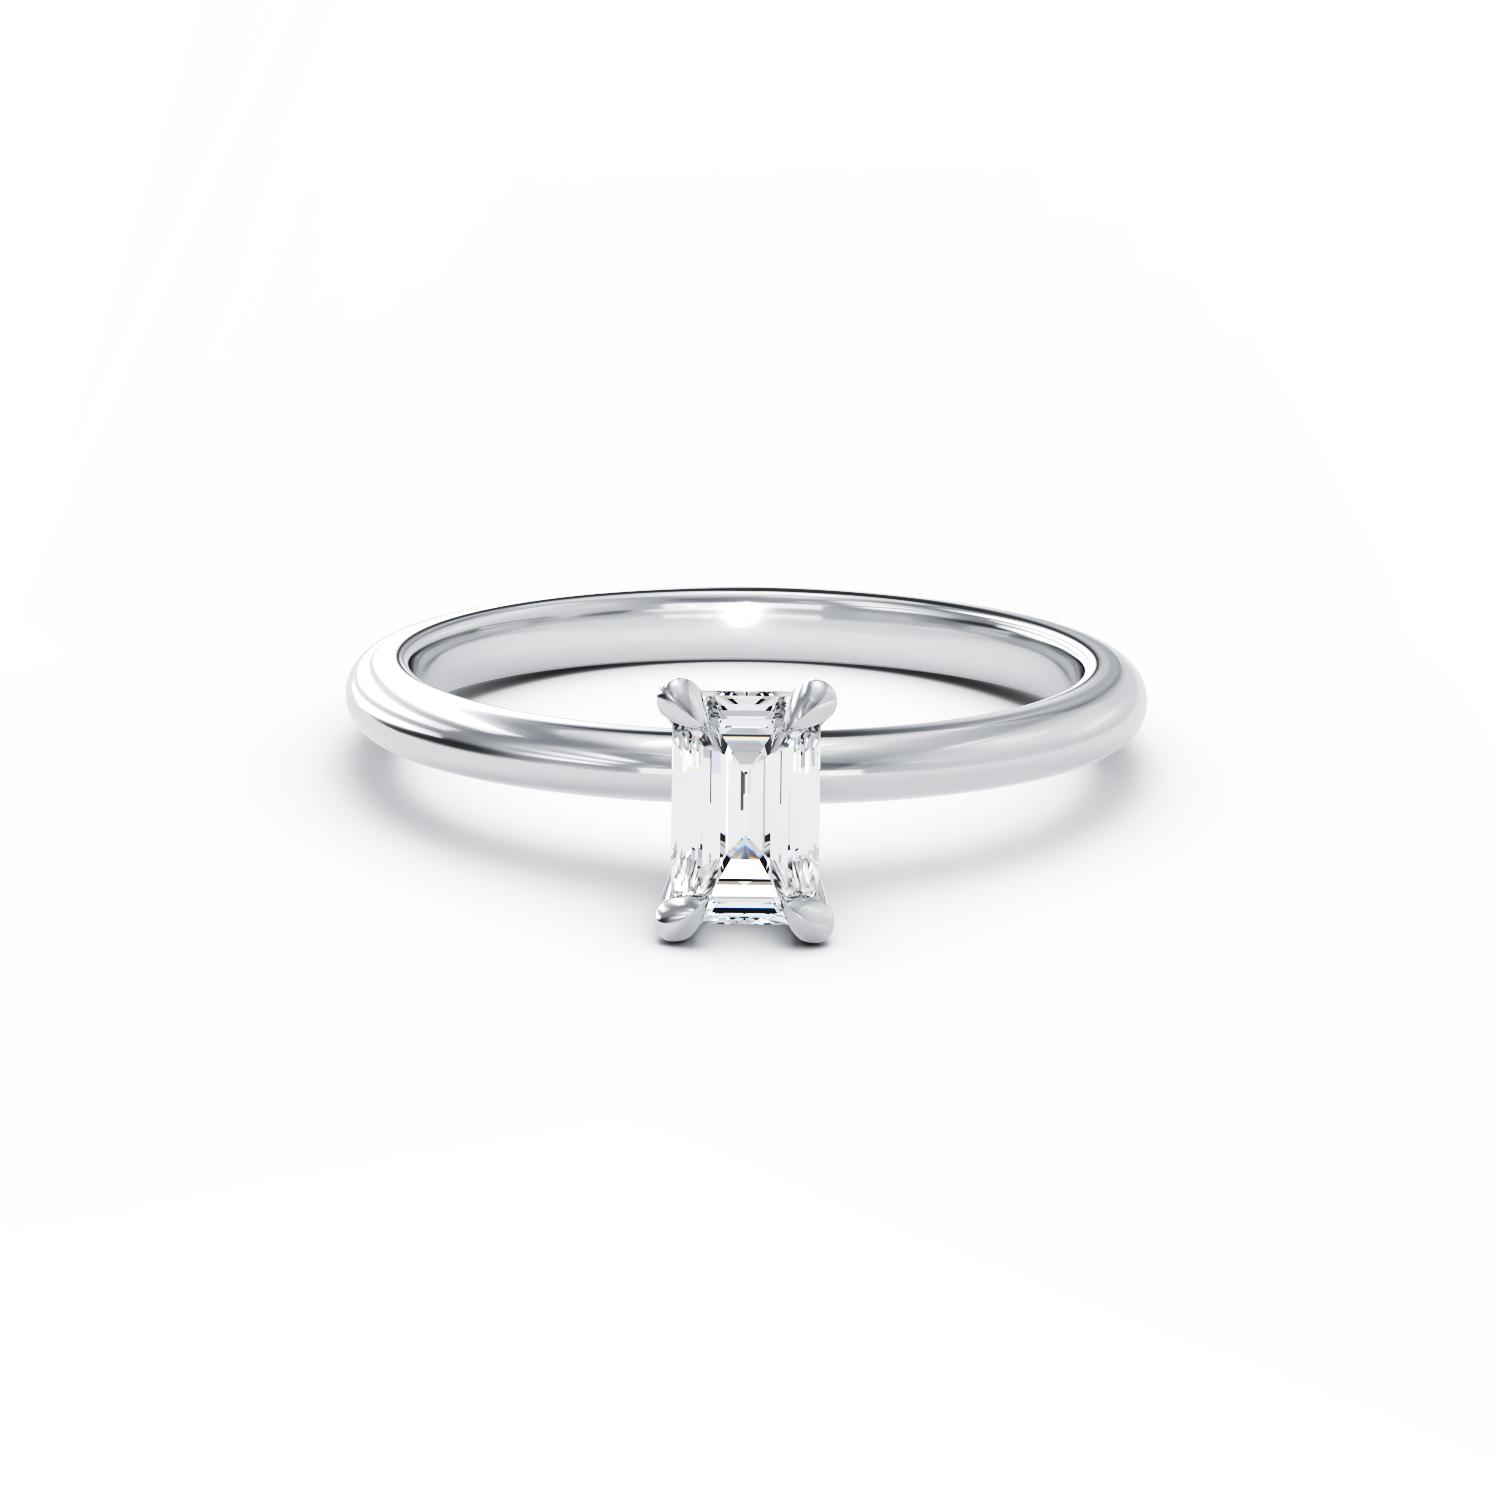 18K white gold engagement ring with 0.3ct Solitaire diamond